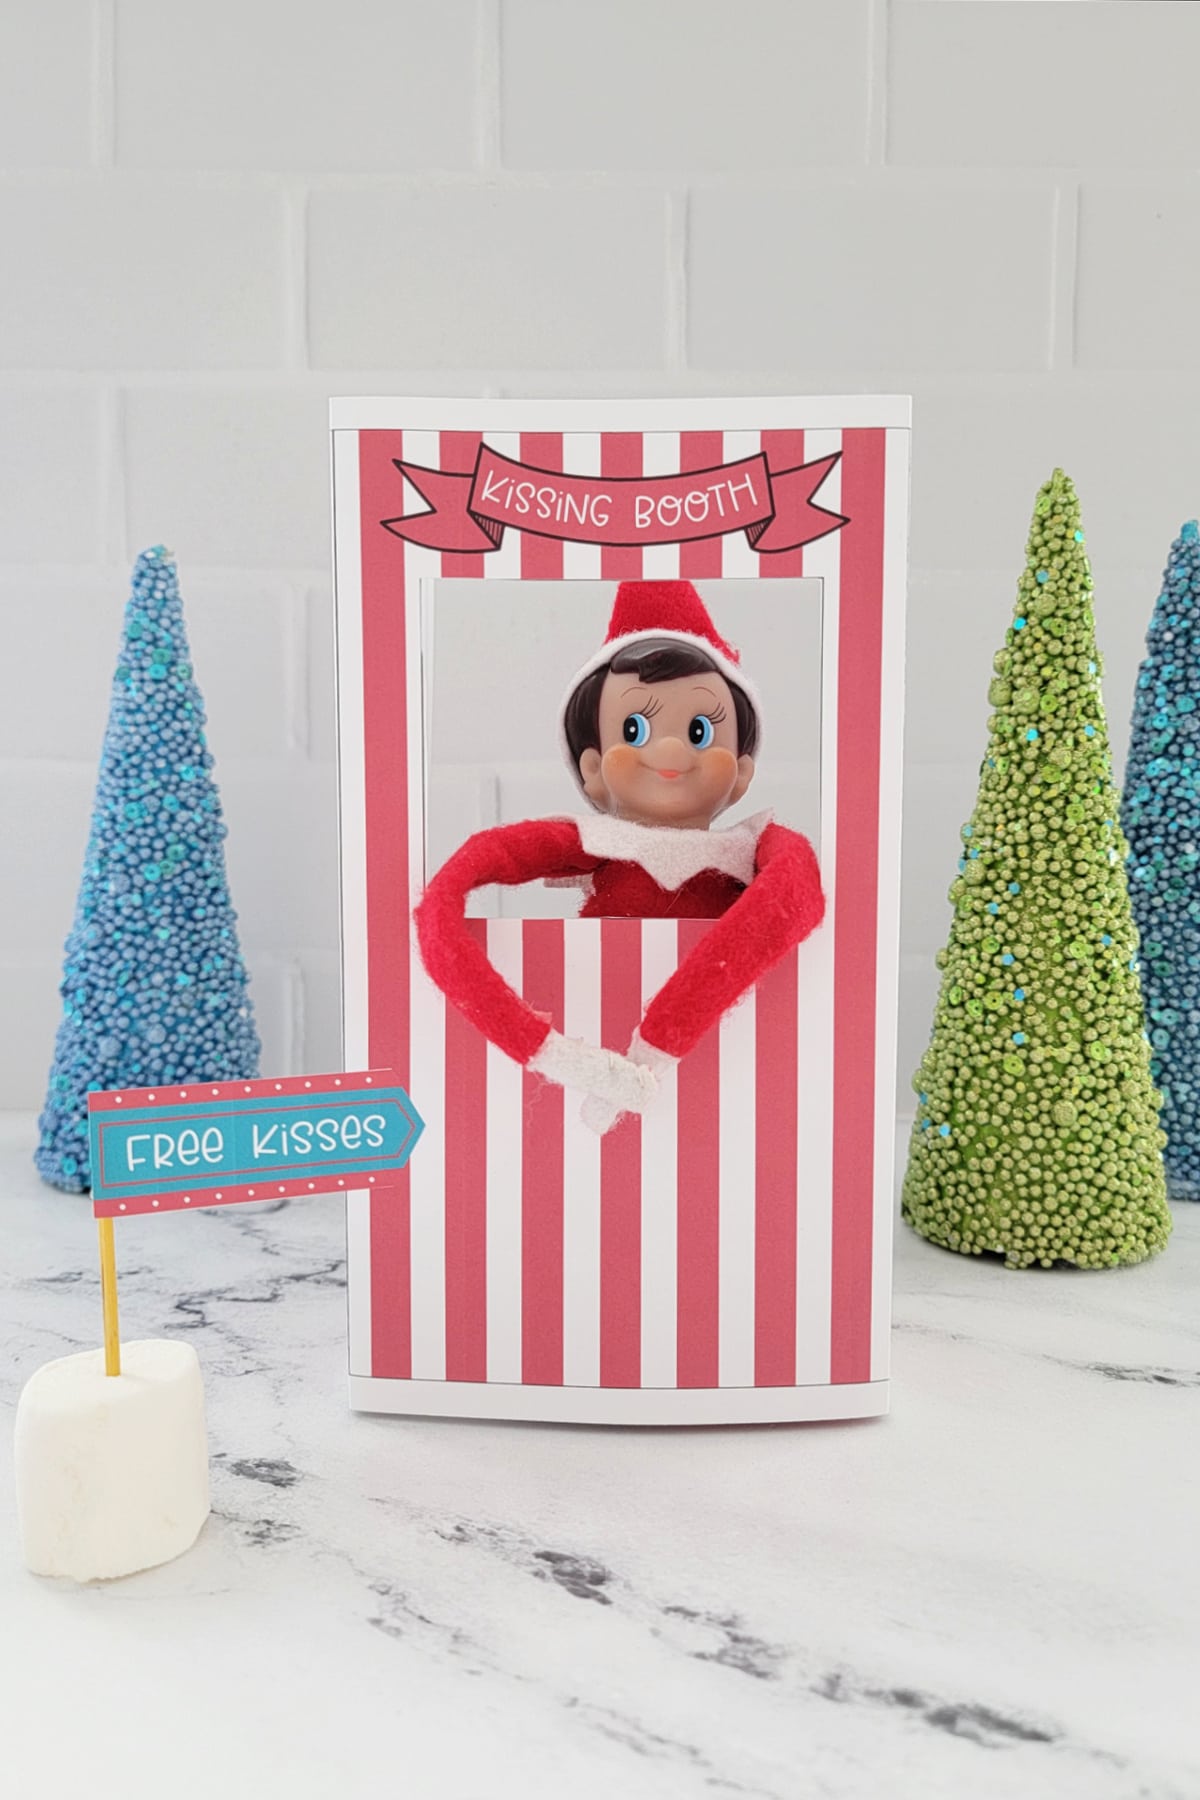 Elf On The Shelf in kissing booth